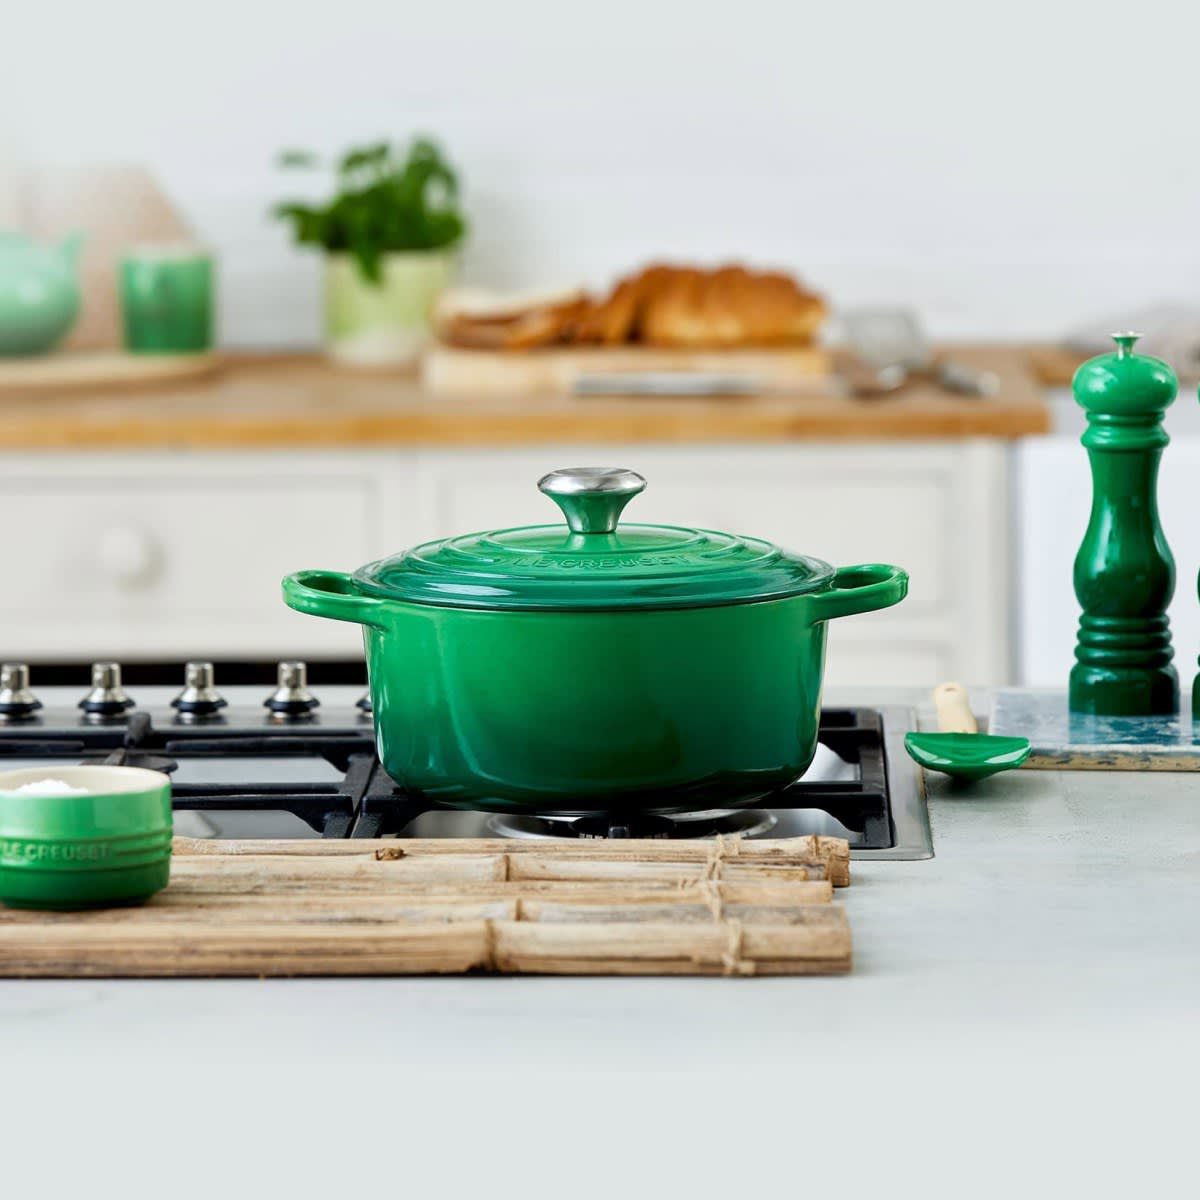 Le Creuset OUTLET in Germany • Sale up to 70% off